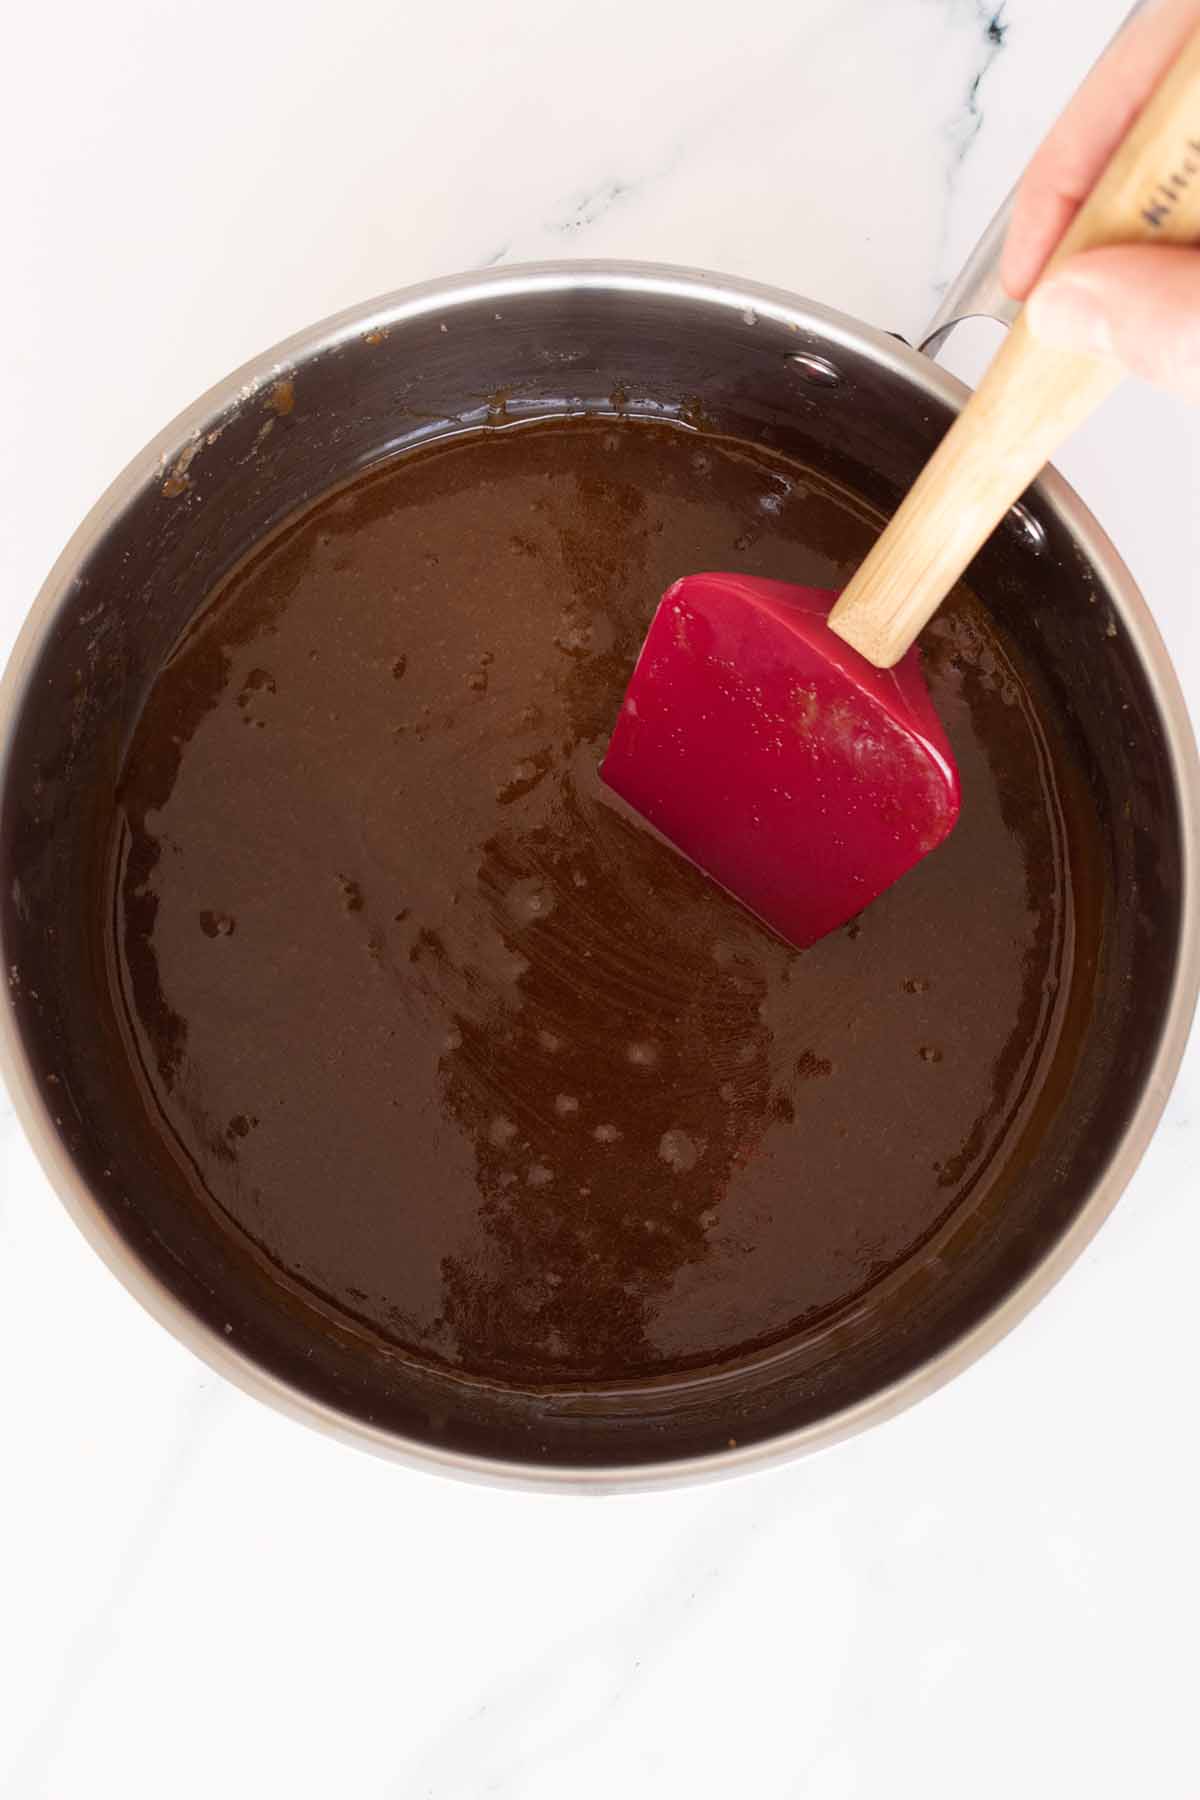 Cooked butter and sugar mixture in a saucepan with a red spatula